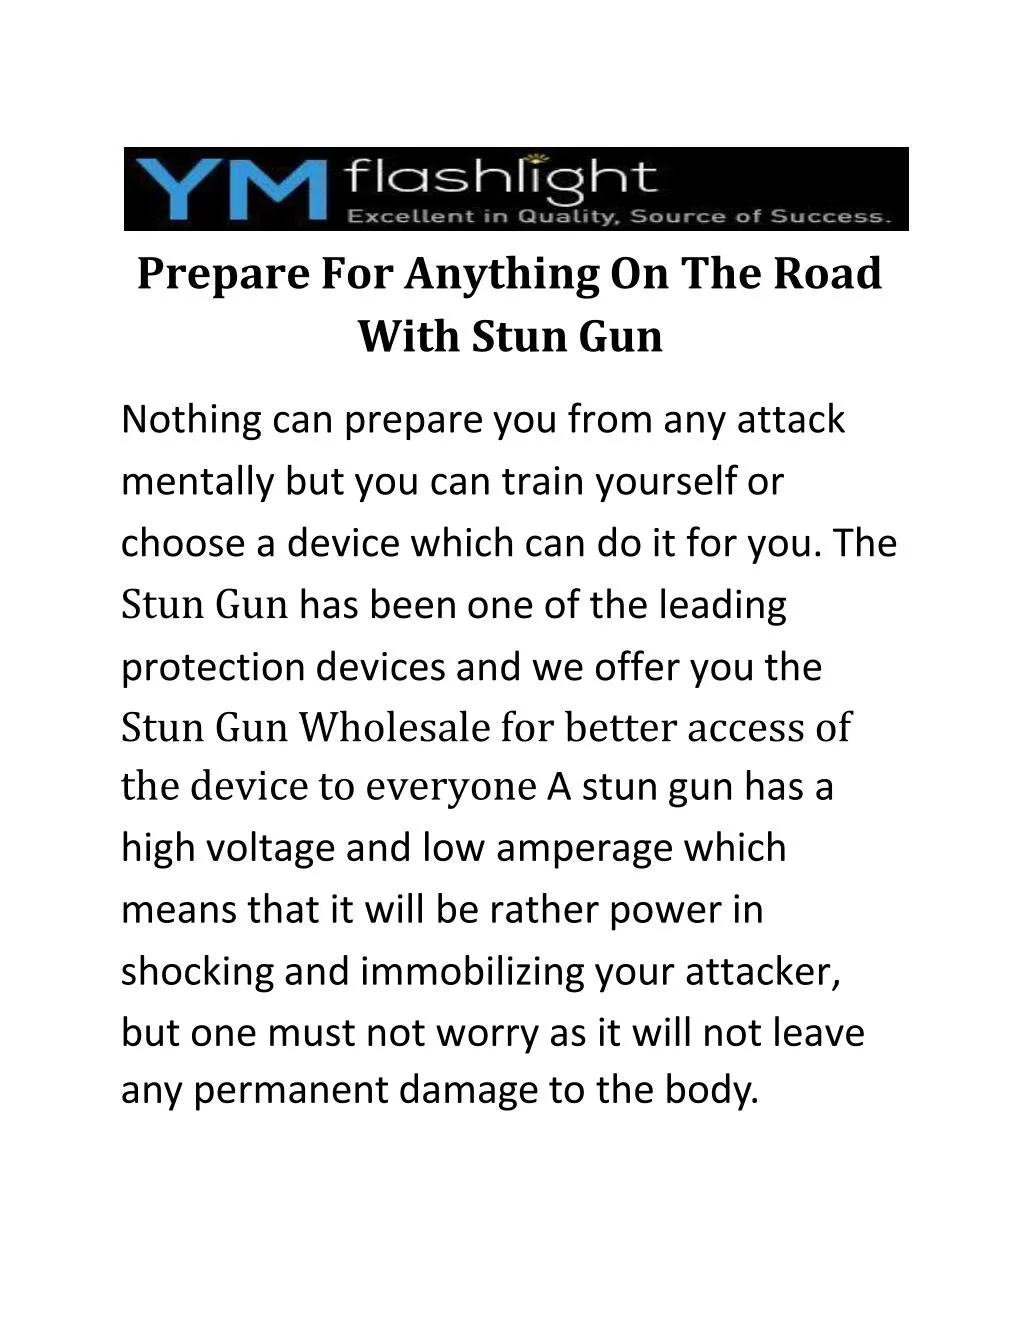 prepare for anything on the road with stun gun